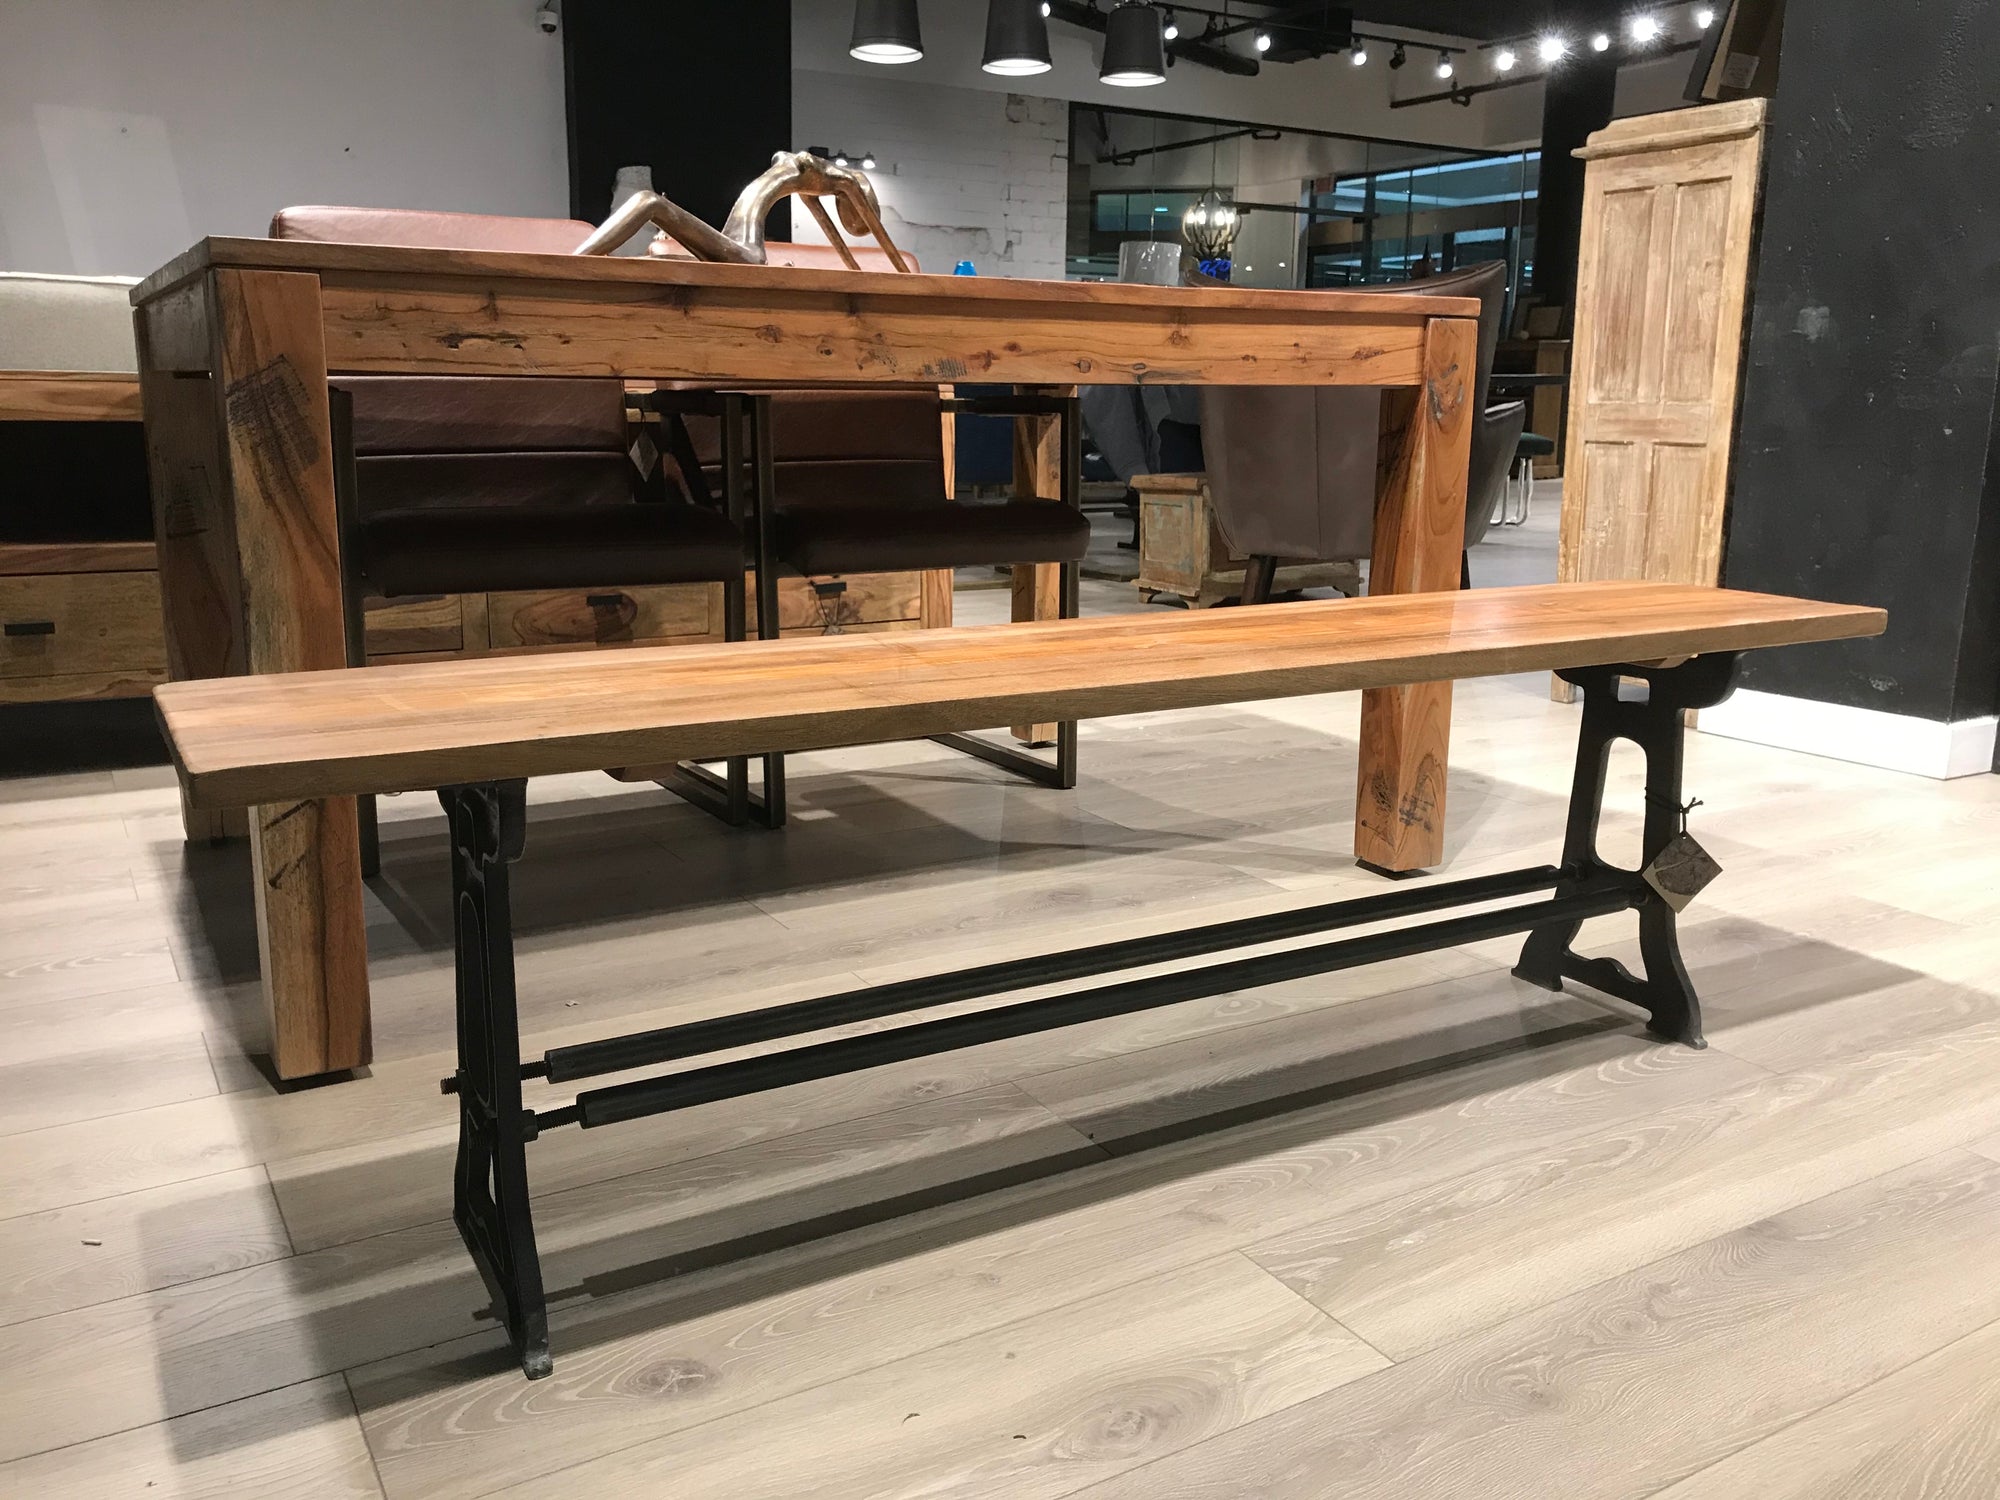 Industrial Reclaimed Wood Bench with Cast Iron legs